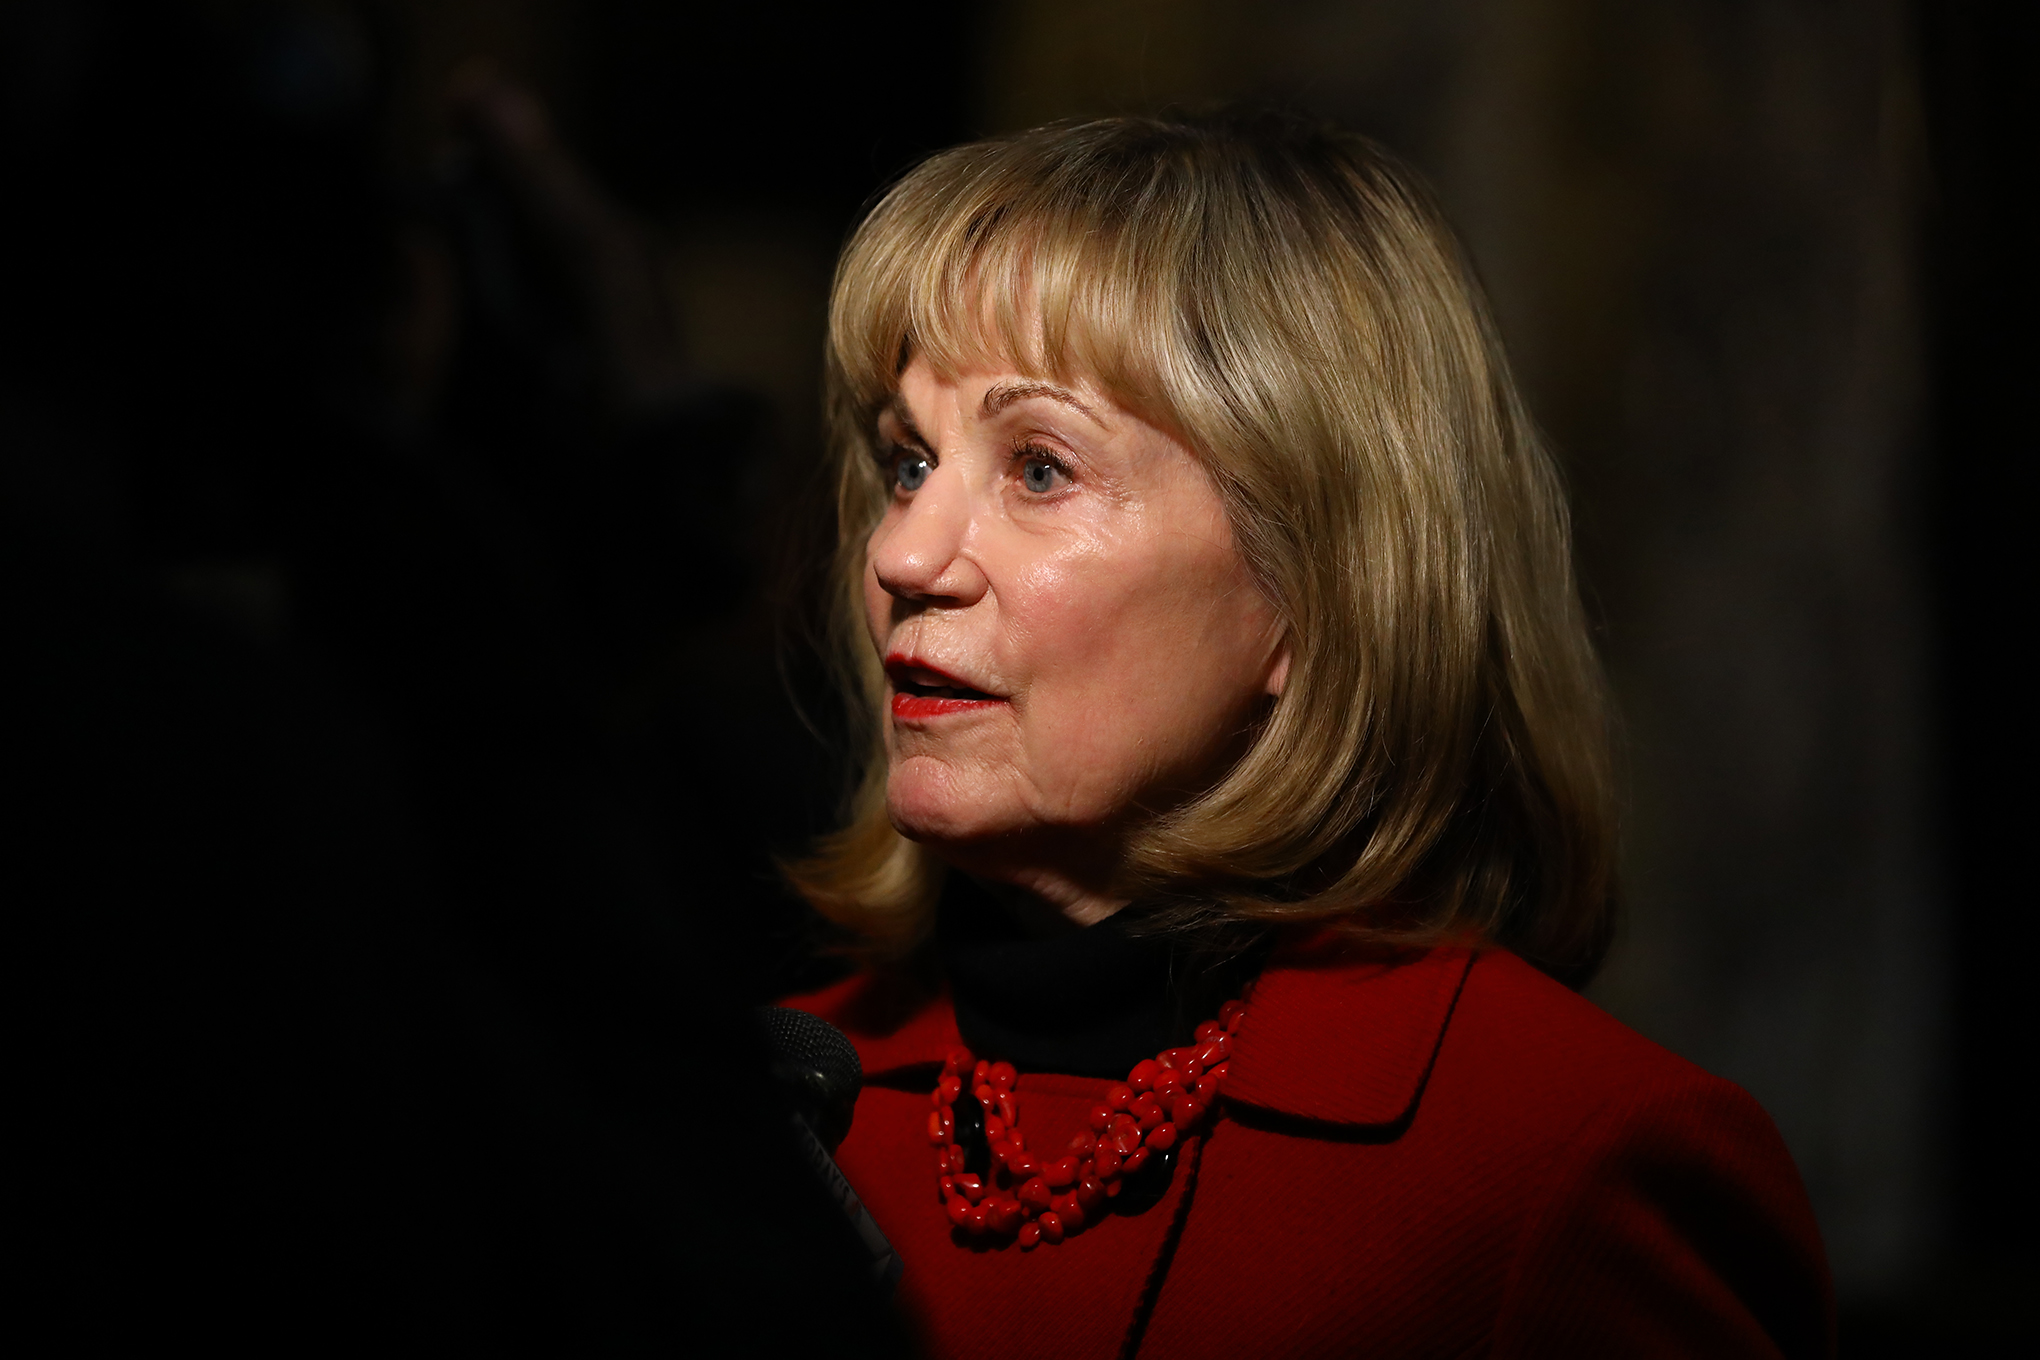 Sen. Alberta Darling, R-River Hills, at the State of the State address at the Capitol in Madison on Jan. 24, 2018. Photo by Coburn Dukehart/Wisconsin Center for Investigative Journalism.